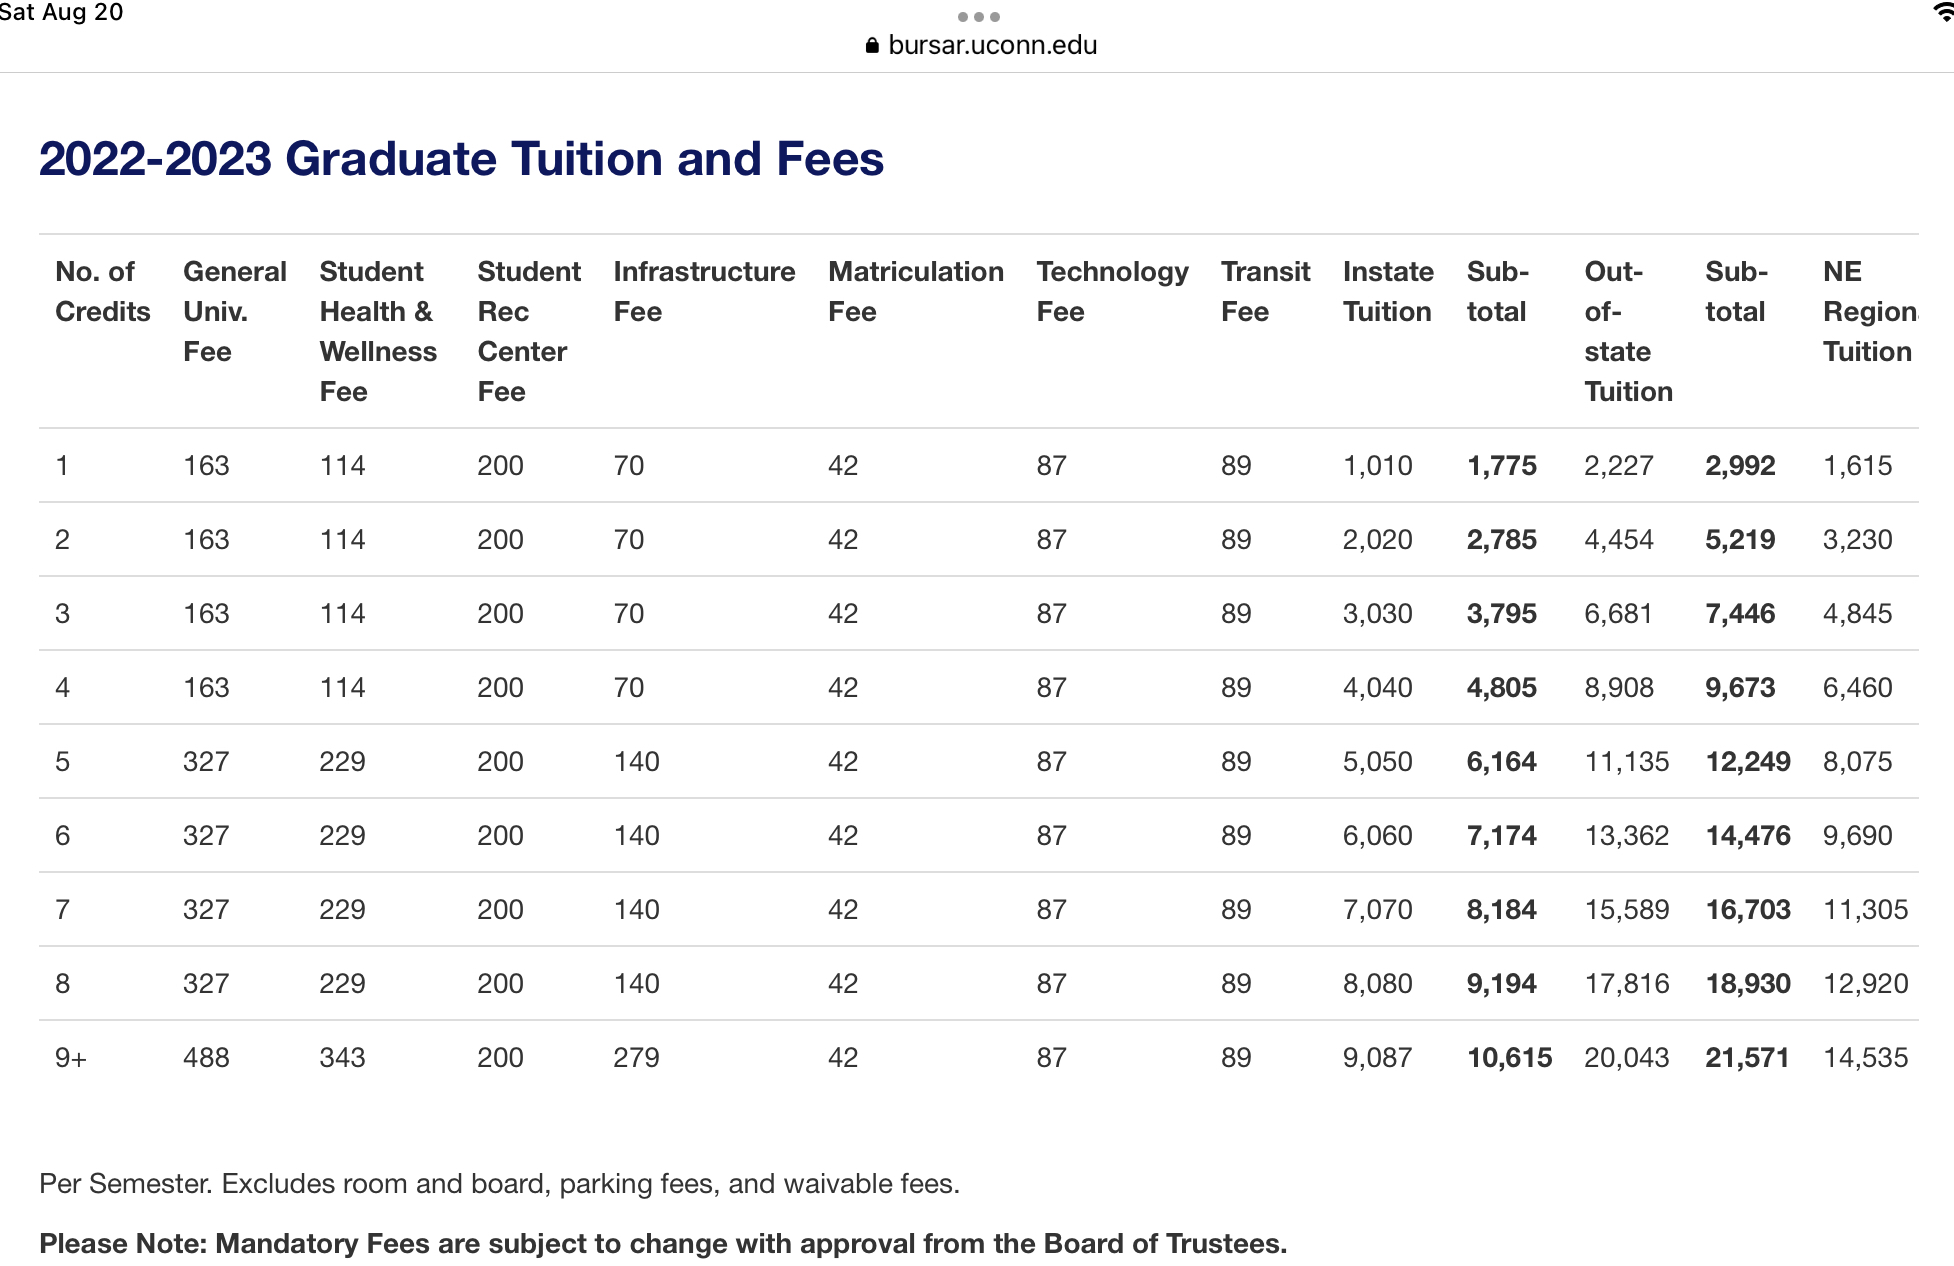 Graphic of Tuition Fees 2022-2023